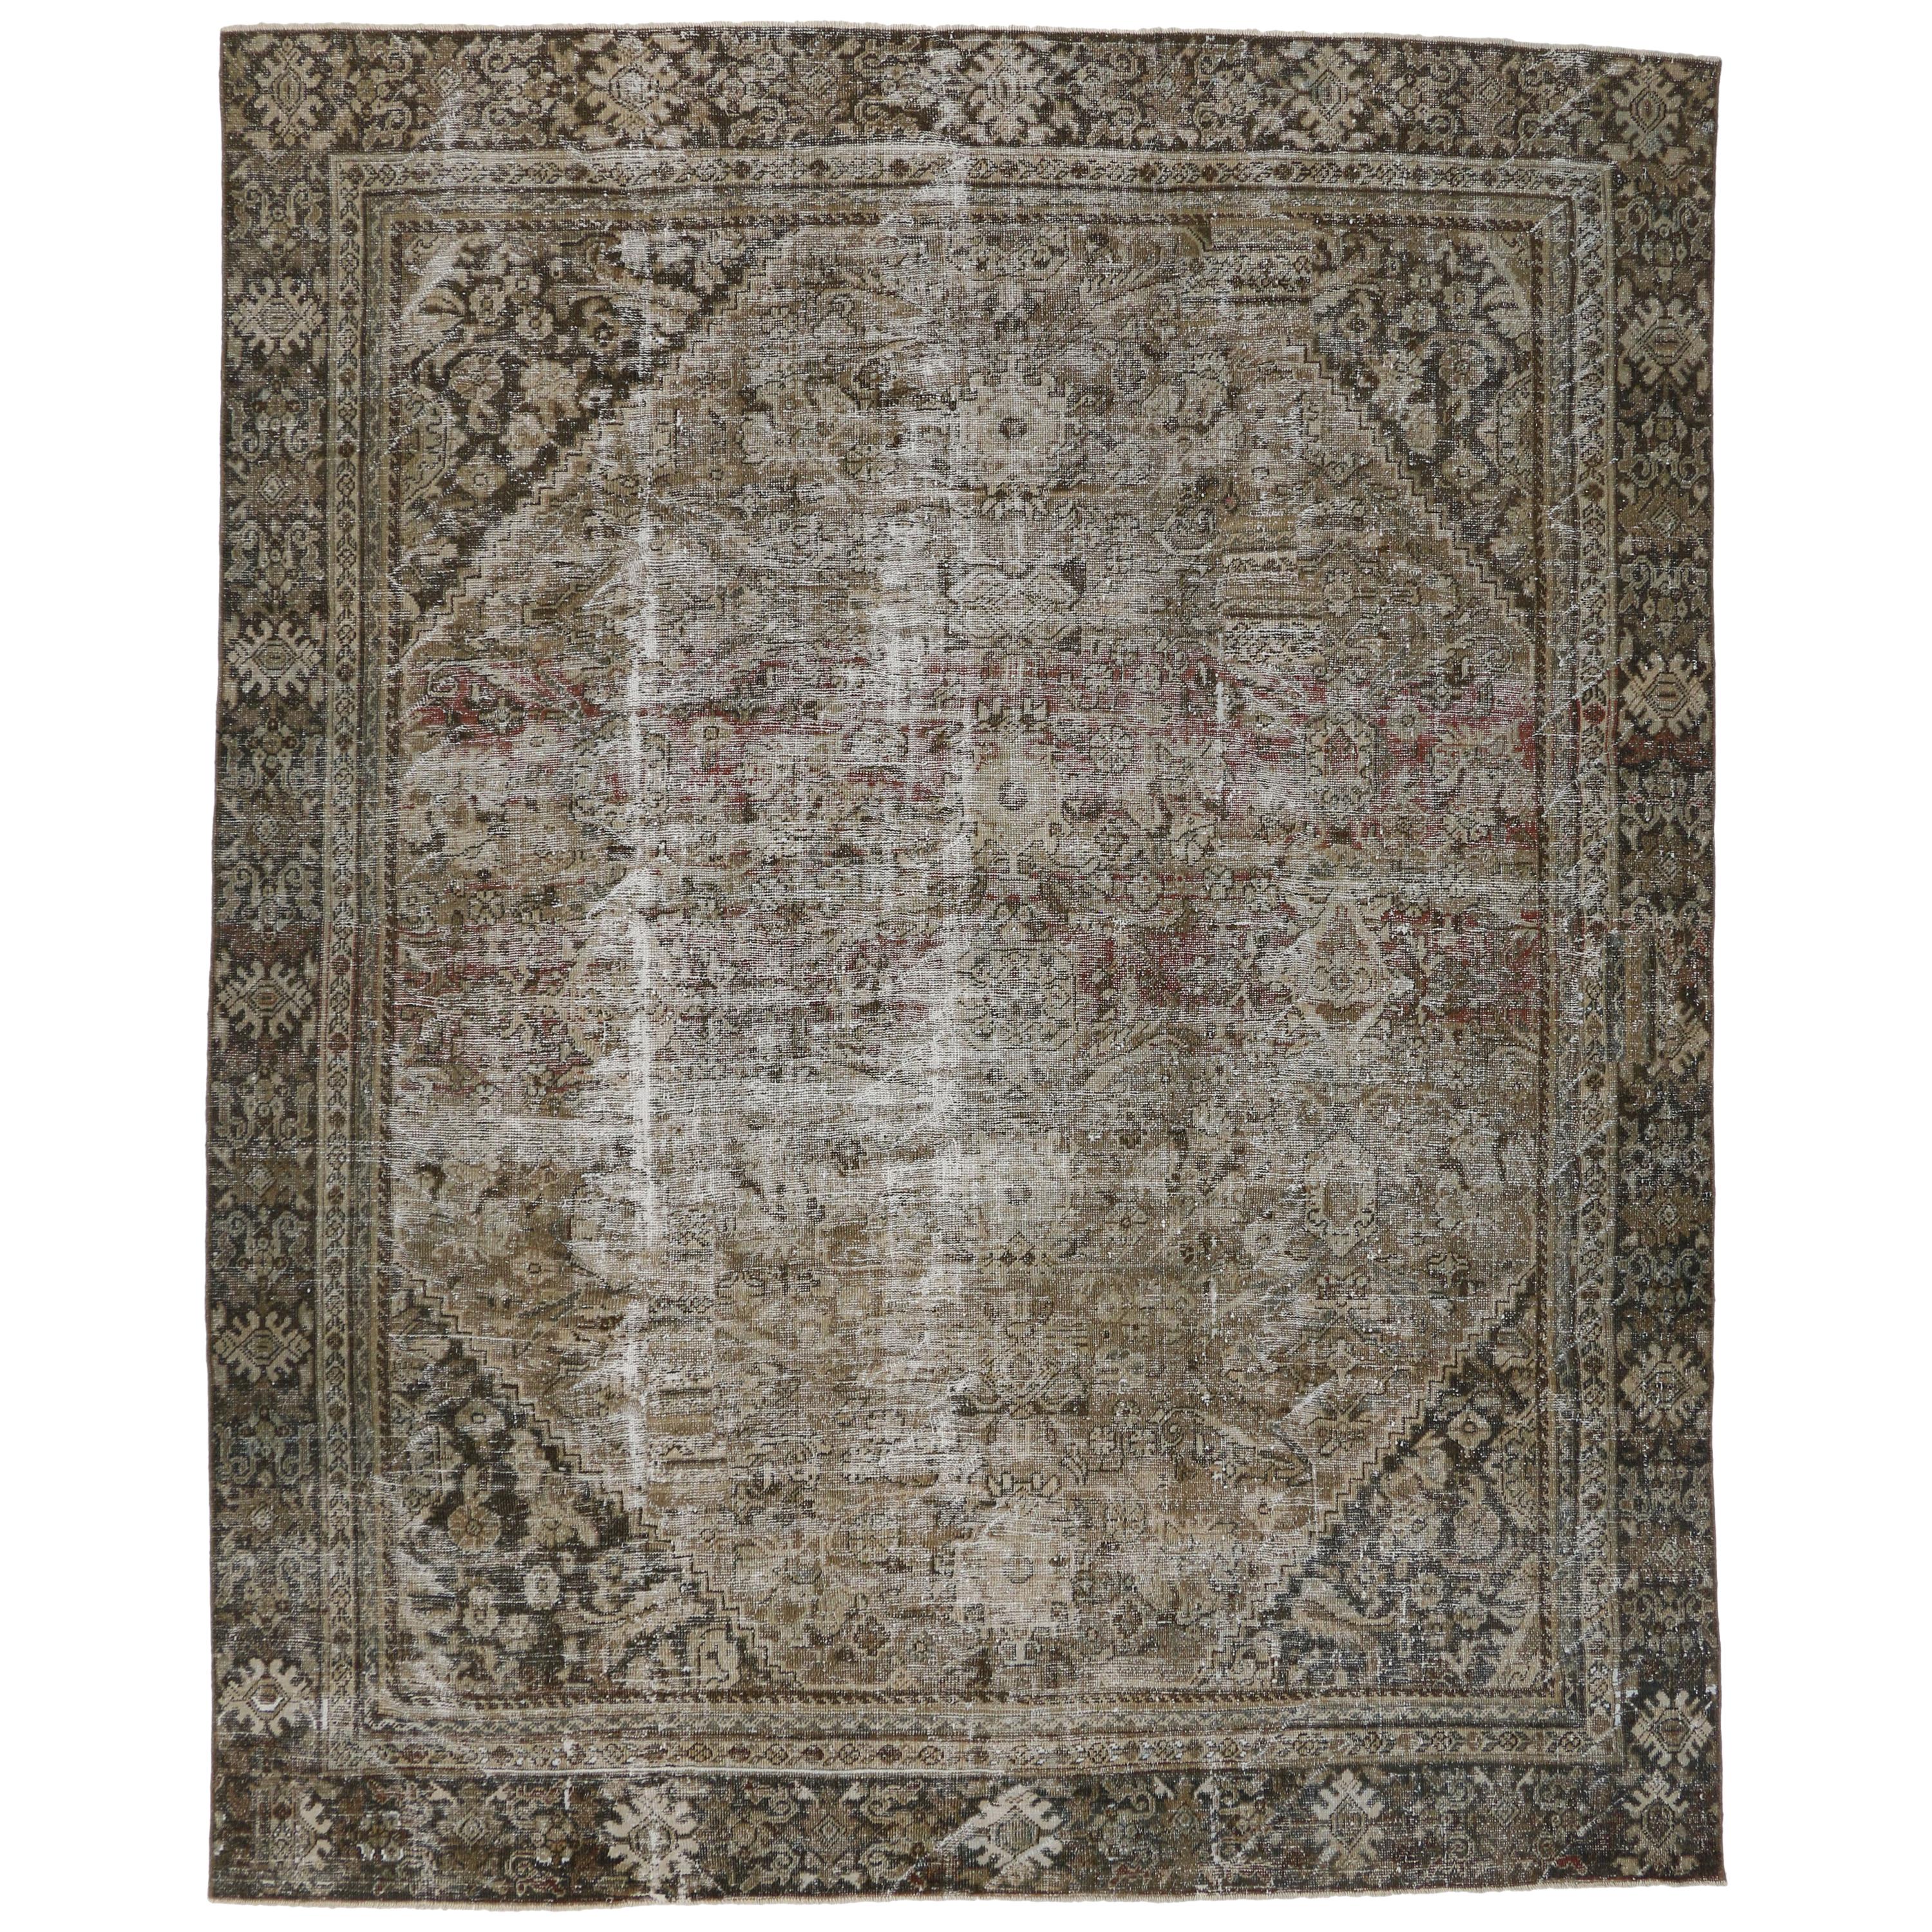 Distressed Antique Persian Mahal Rug with Modern Urban Industrial Style